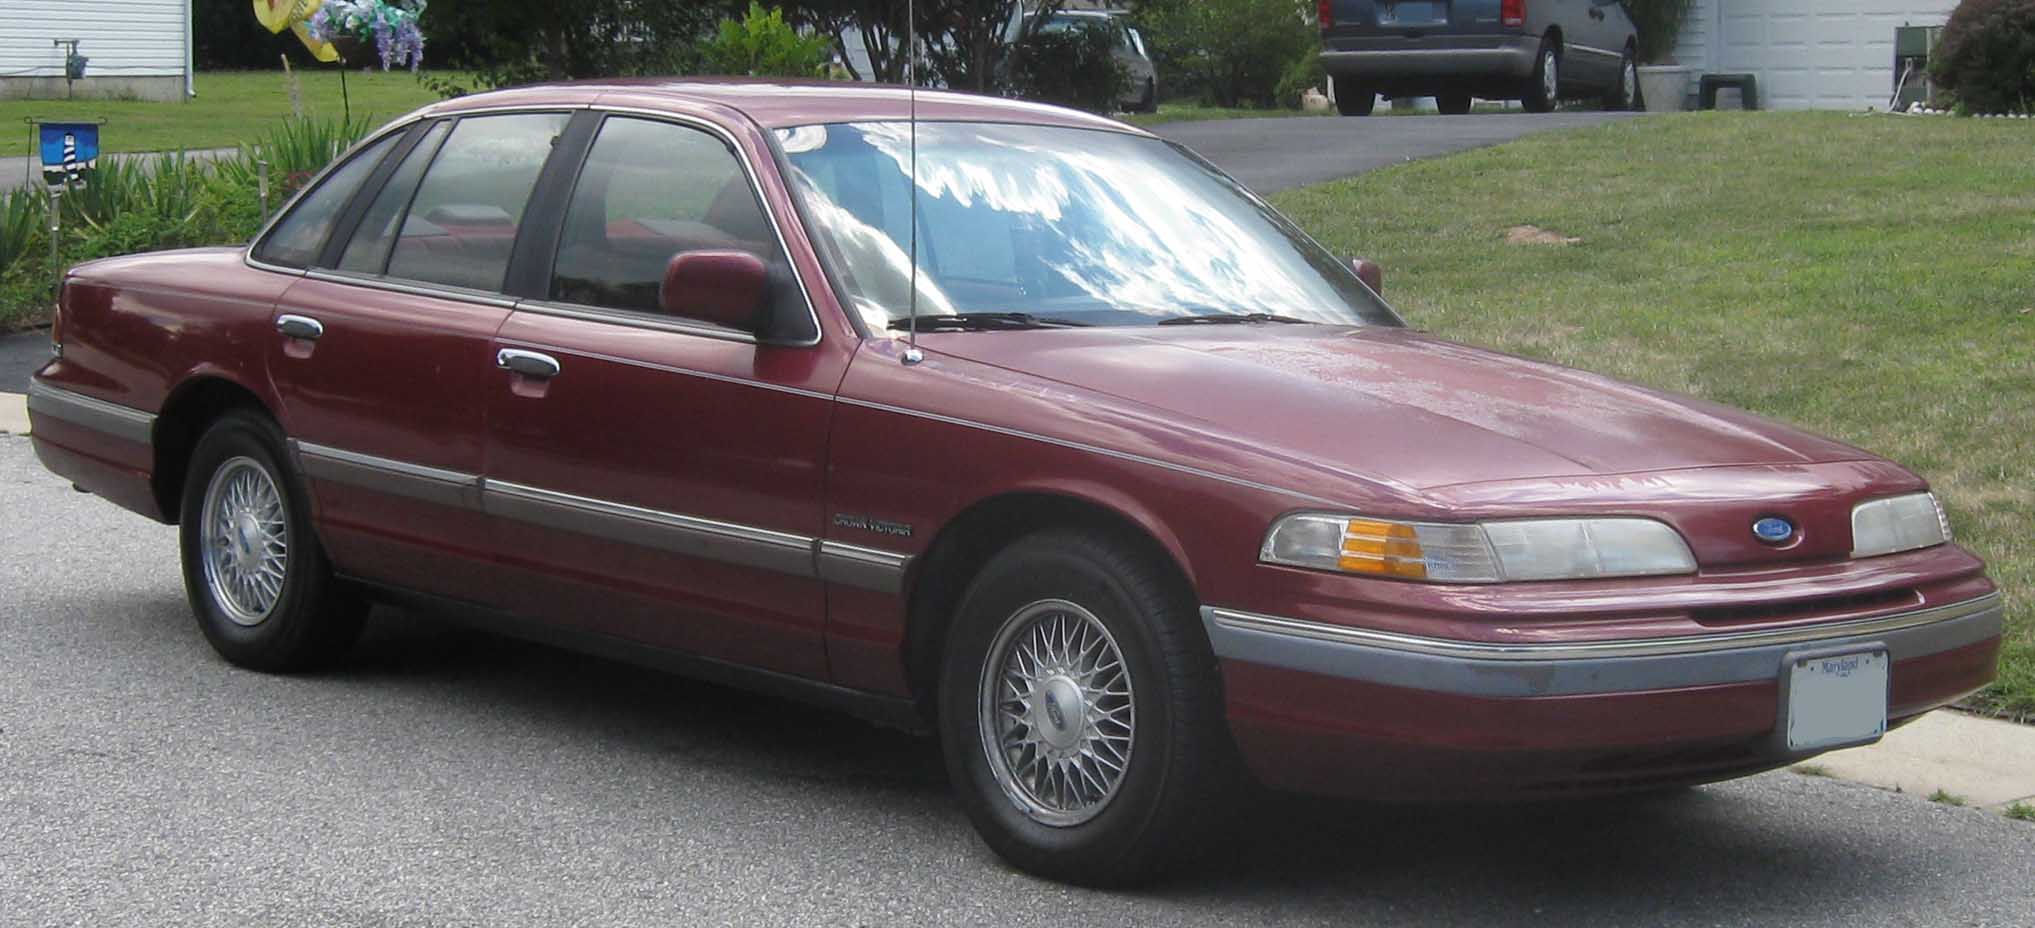 Ford Crown Victoria 1995 #2